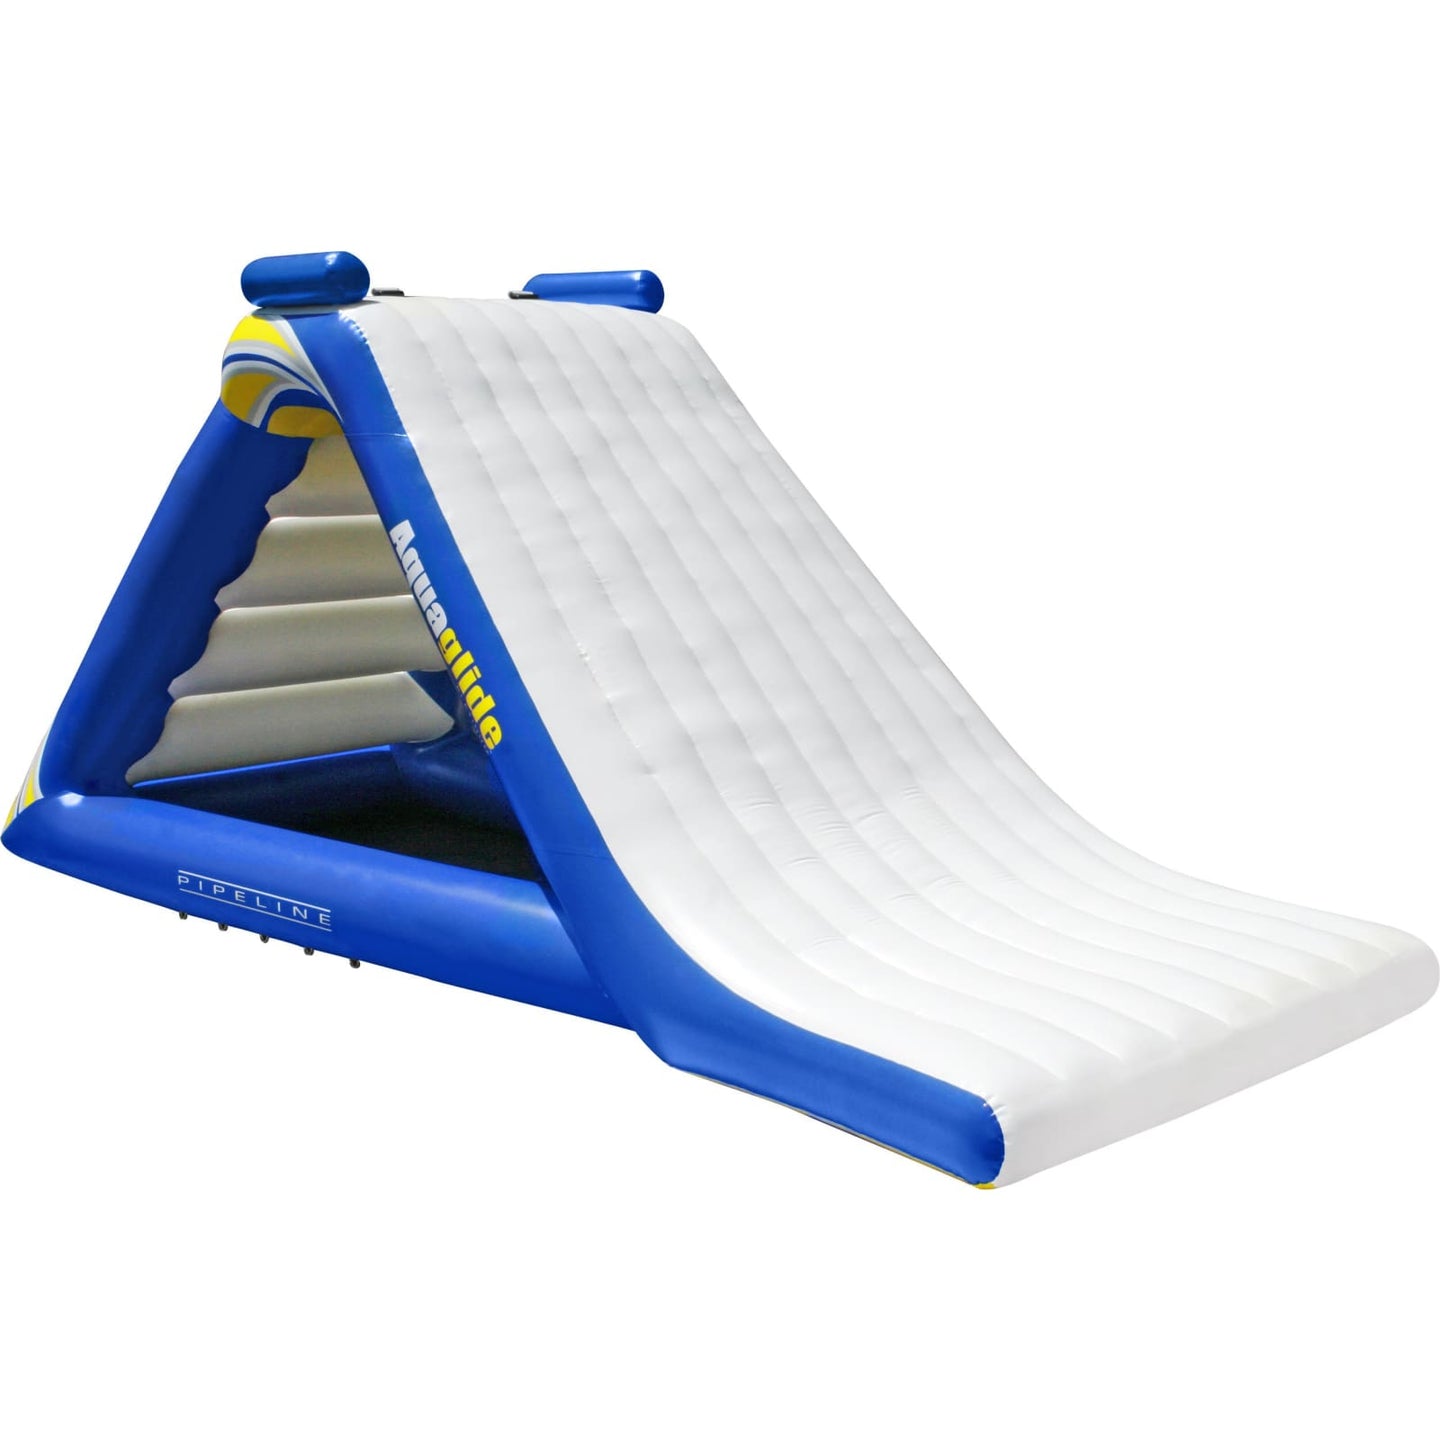 Aquaglide Freefall Extreme Slide - 585219628 - Water Toys